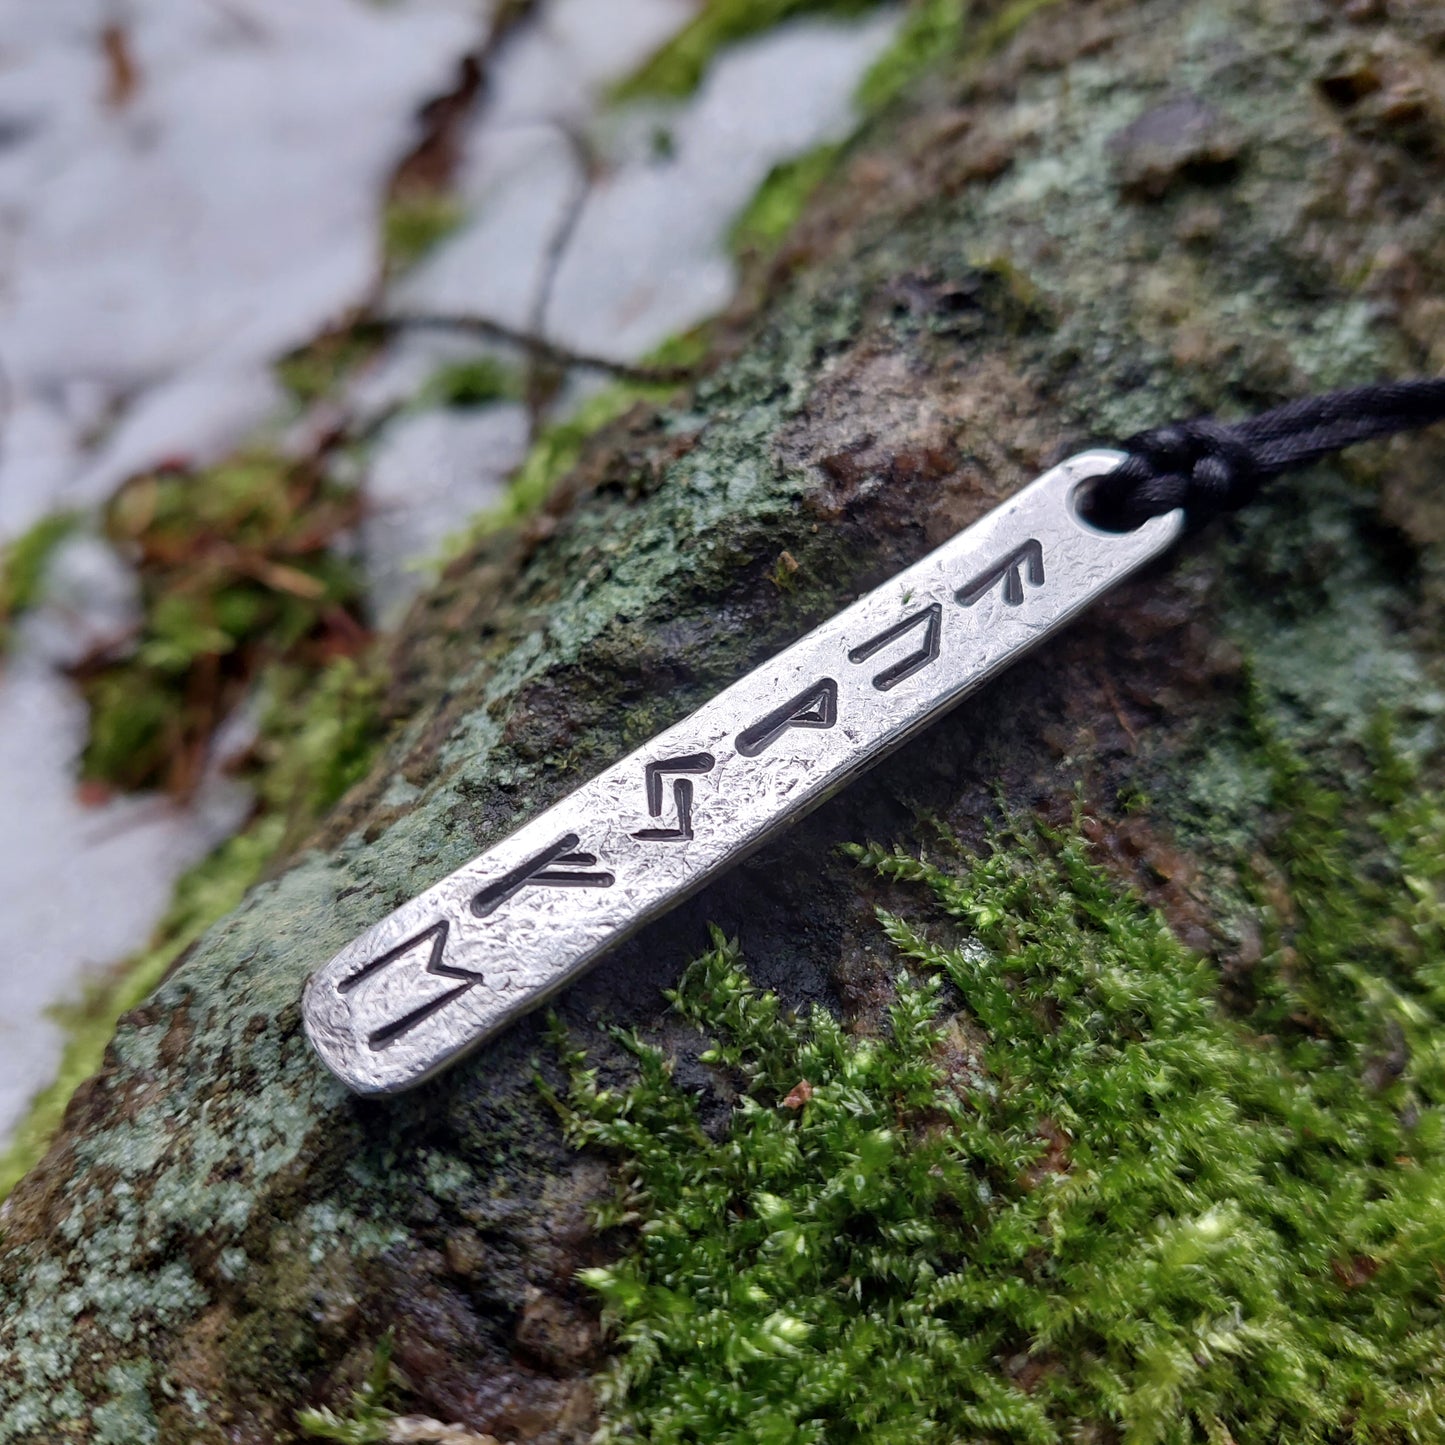 Luck Wealth money and Prosperity amulet pendant with runes formula. Silver rune amulet, Fehu. Roughly made, forged.